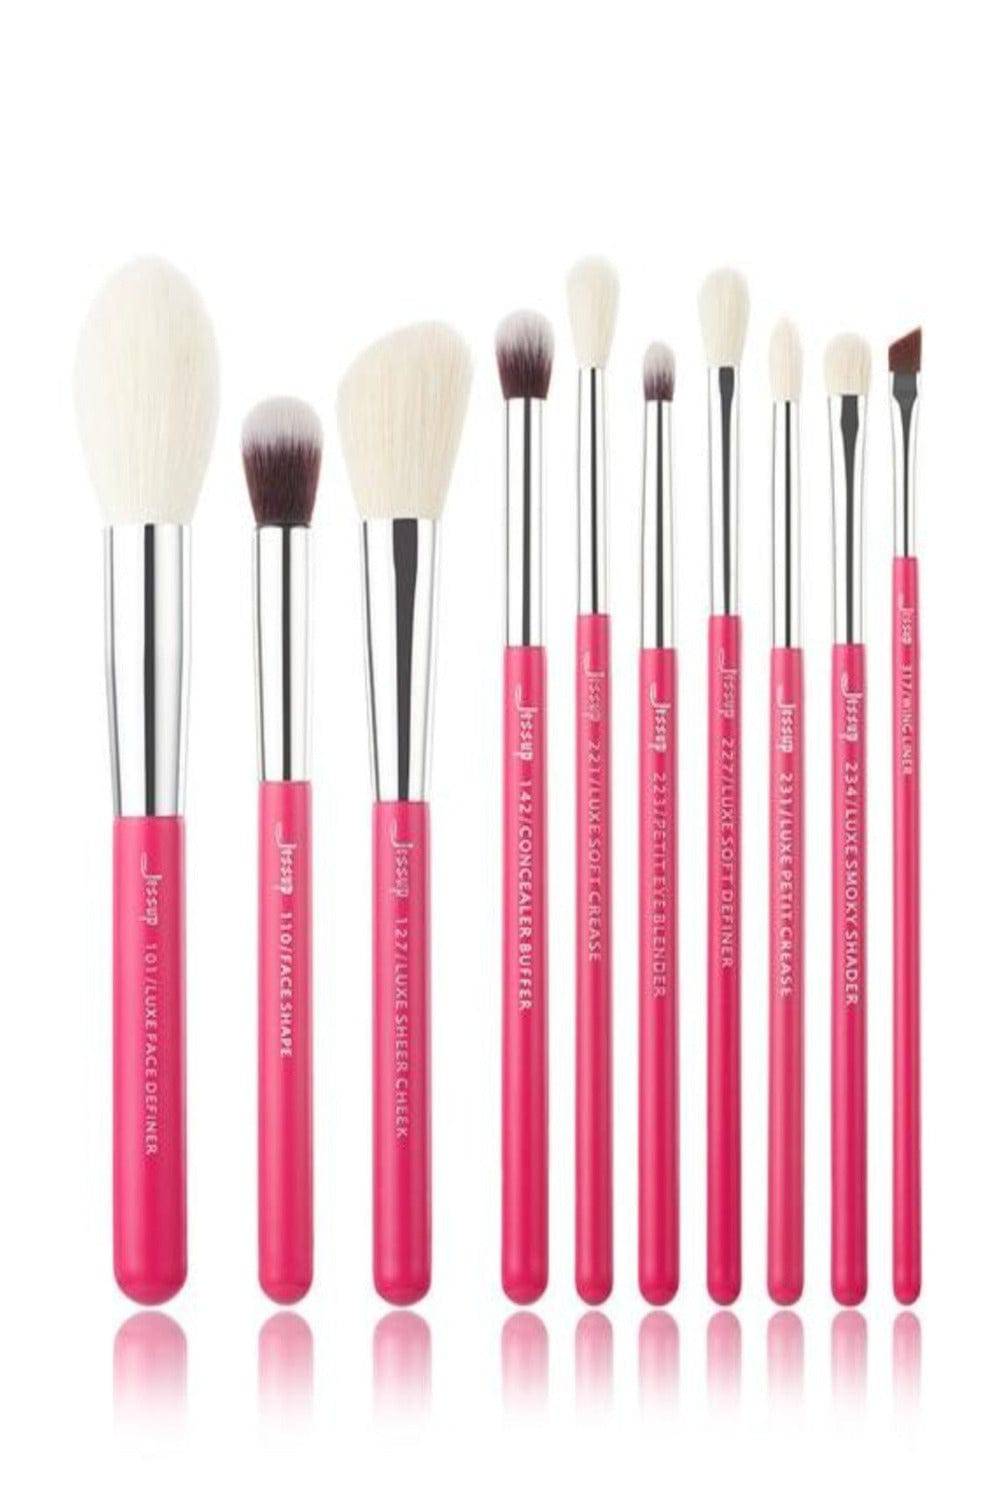 Girl On The Go Professional Makeup Brush Set - 10 Pack - TGC Boutique - Makeup Brushes